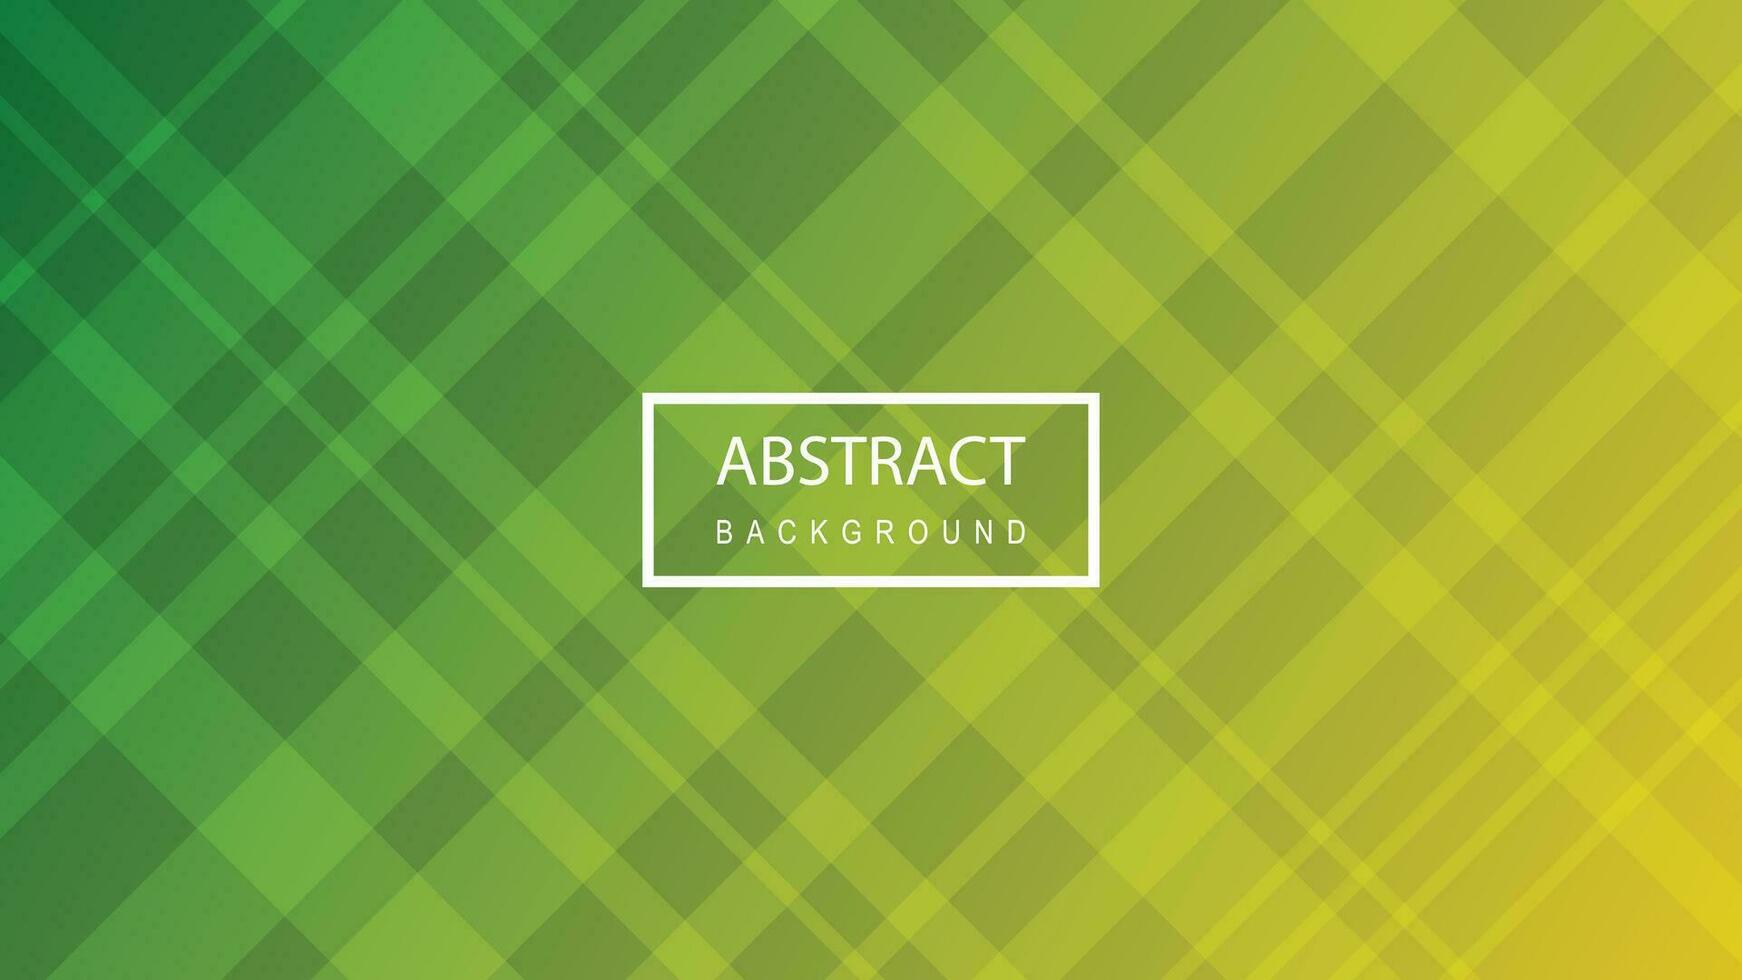 Abstract modern background design vector